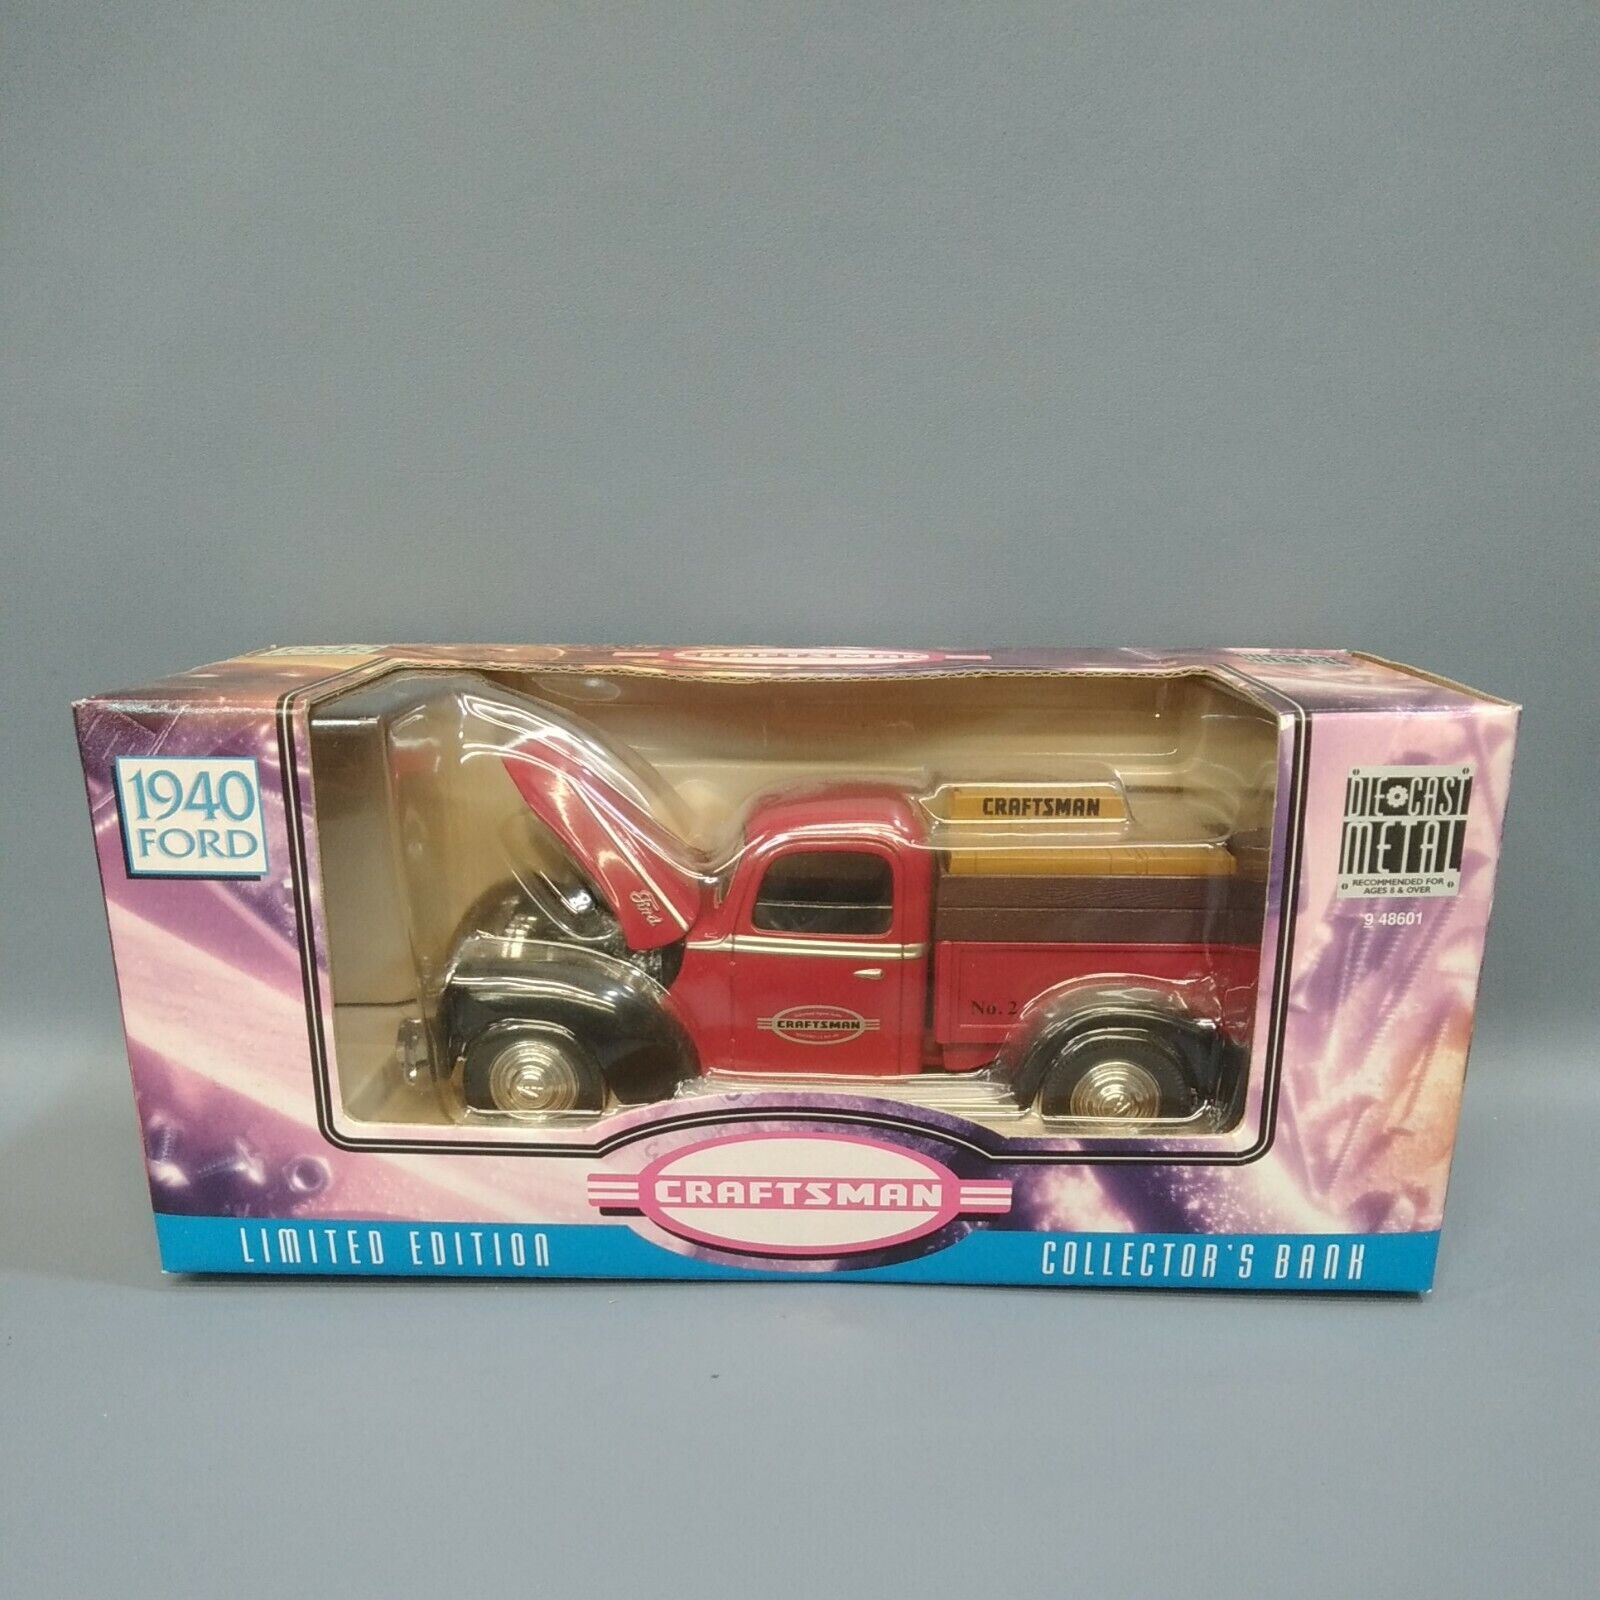 Excellence CRAFTSMAN 1940 FORD TRUCK DIECAST COLLECTOR'S 24 BANK in 1 Cash special price #2 se